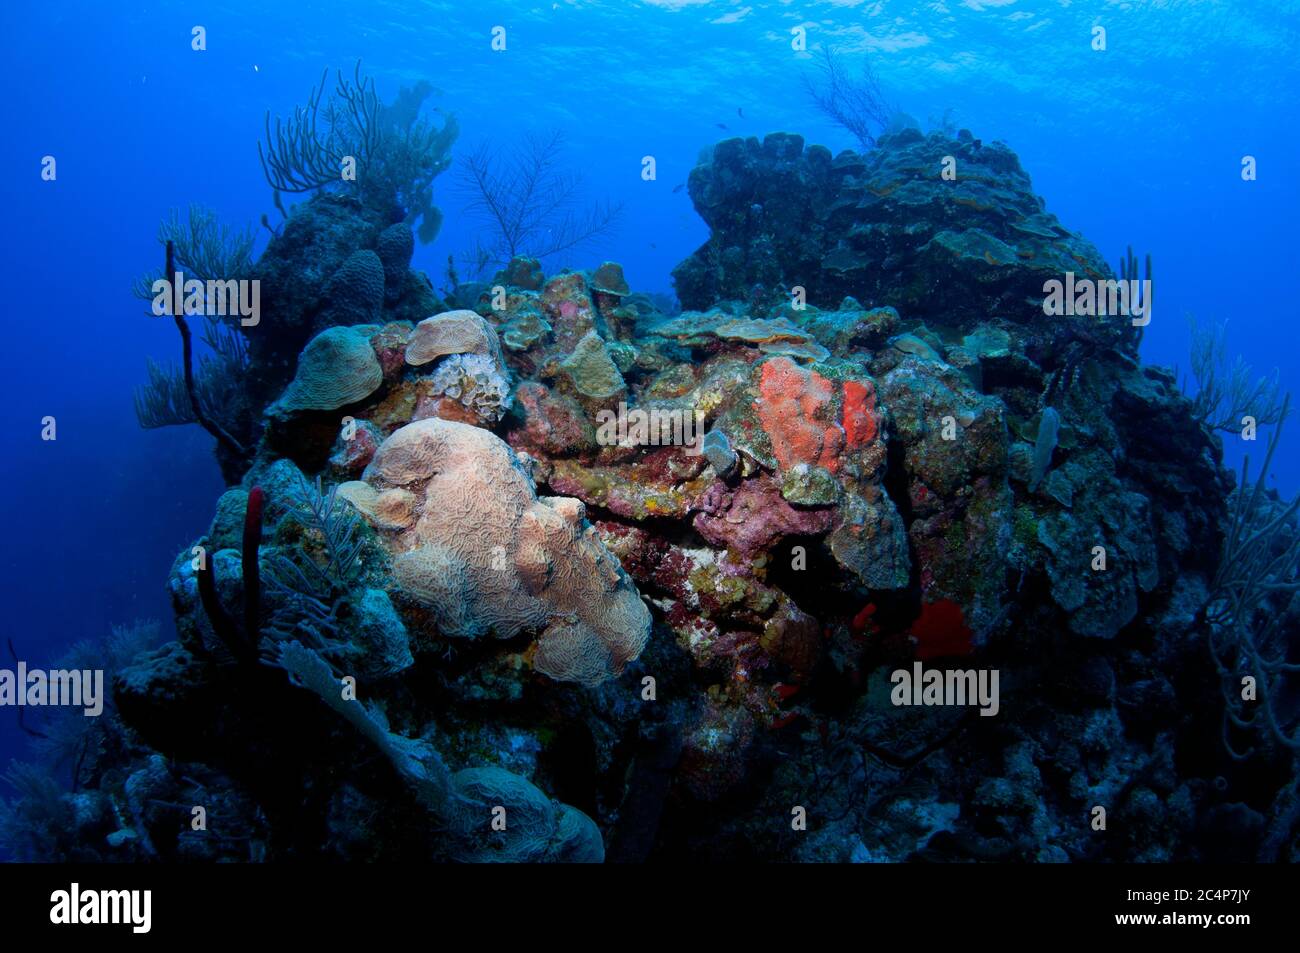 Lettuce coral, Agaricia agaricites, encrusted in a reef with high biodiversity, Lighthouse Reef Atoll, Belize Stock Photo